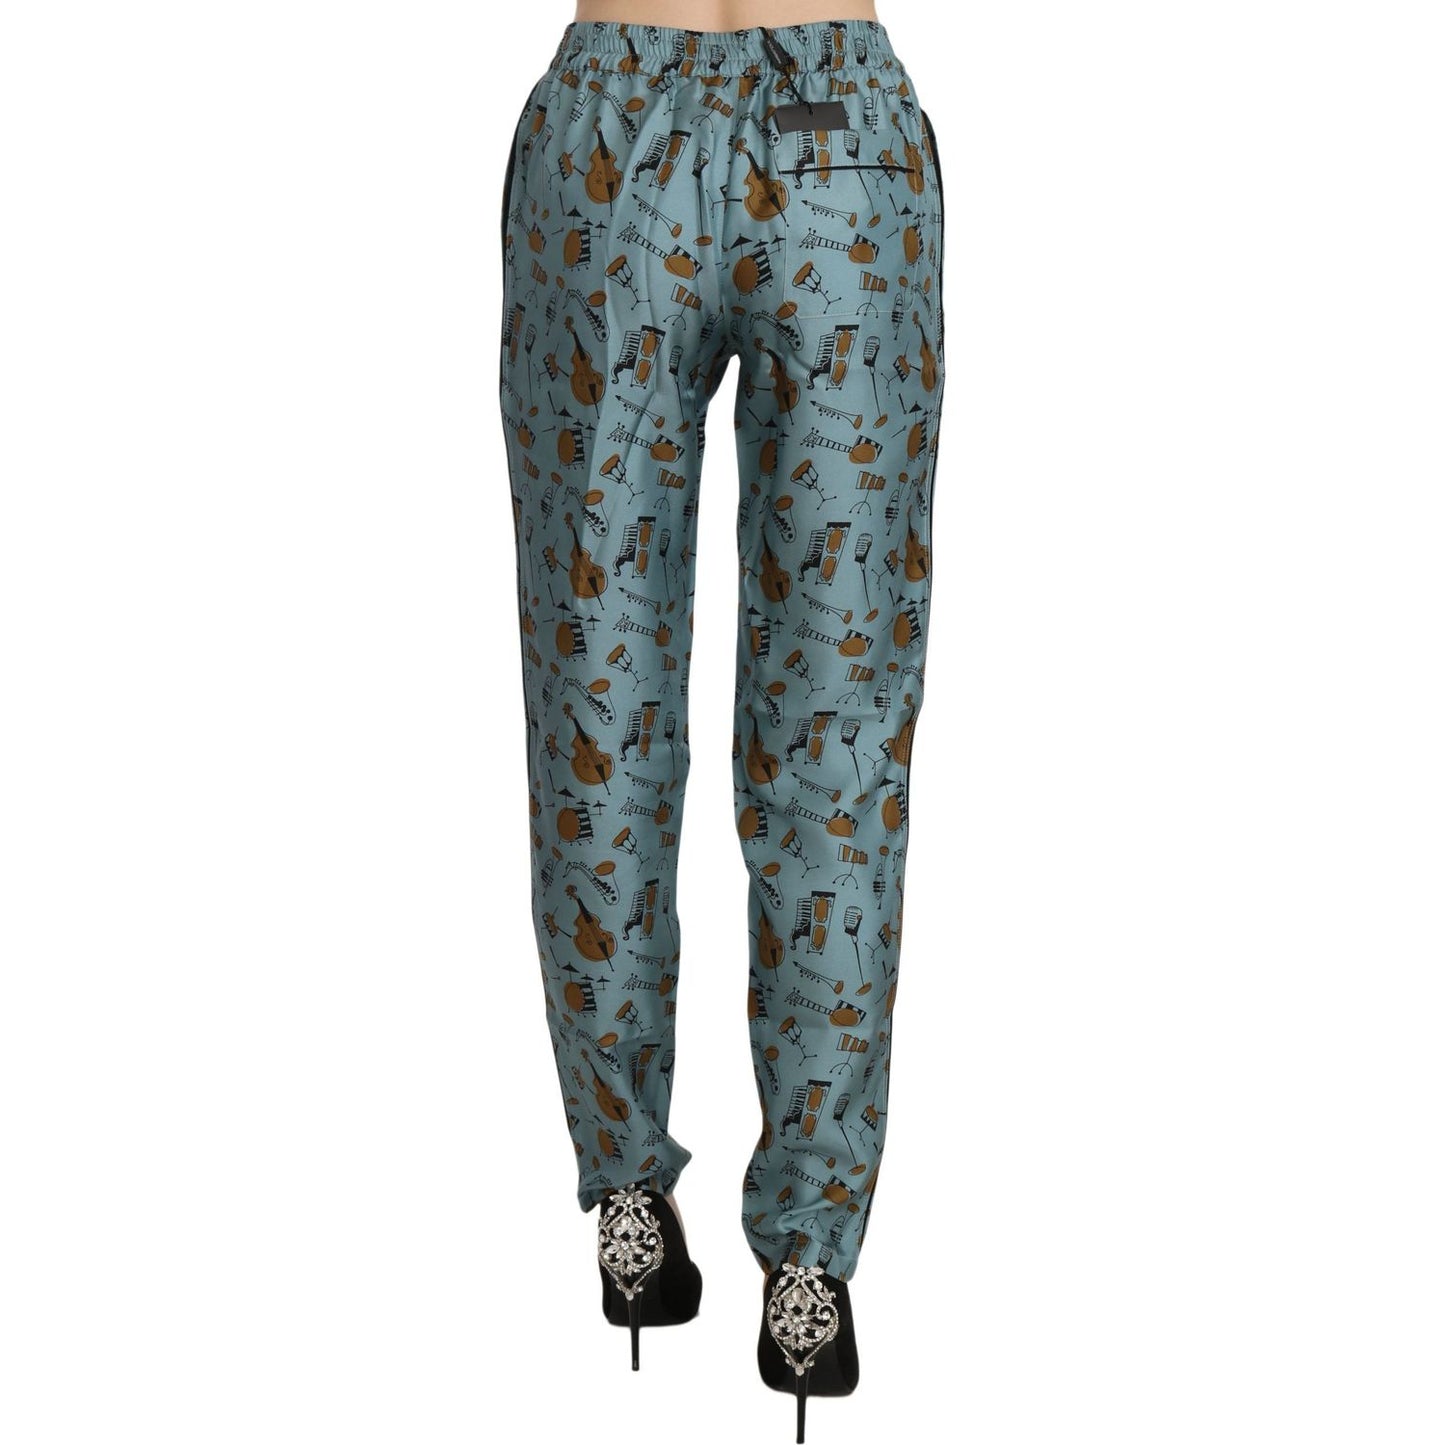 Dolce & Gabbana High Waist Tapered Silk Pants in Blue Print blue-musical-instruments-print-tapered-pants